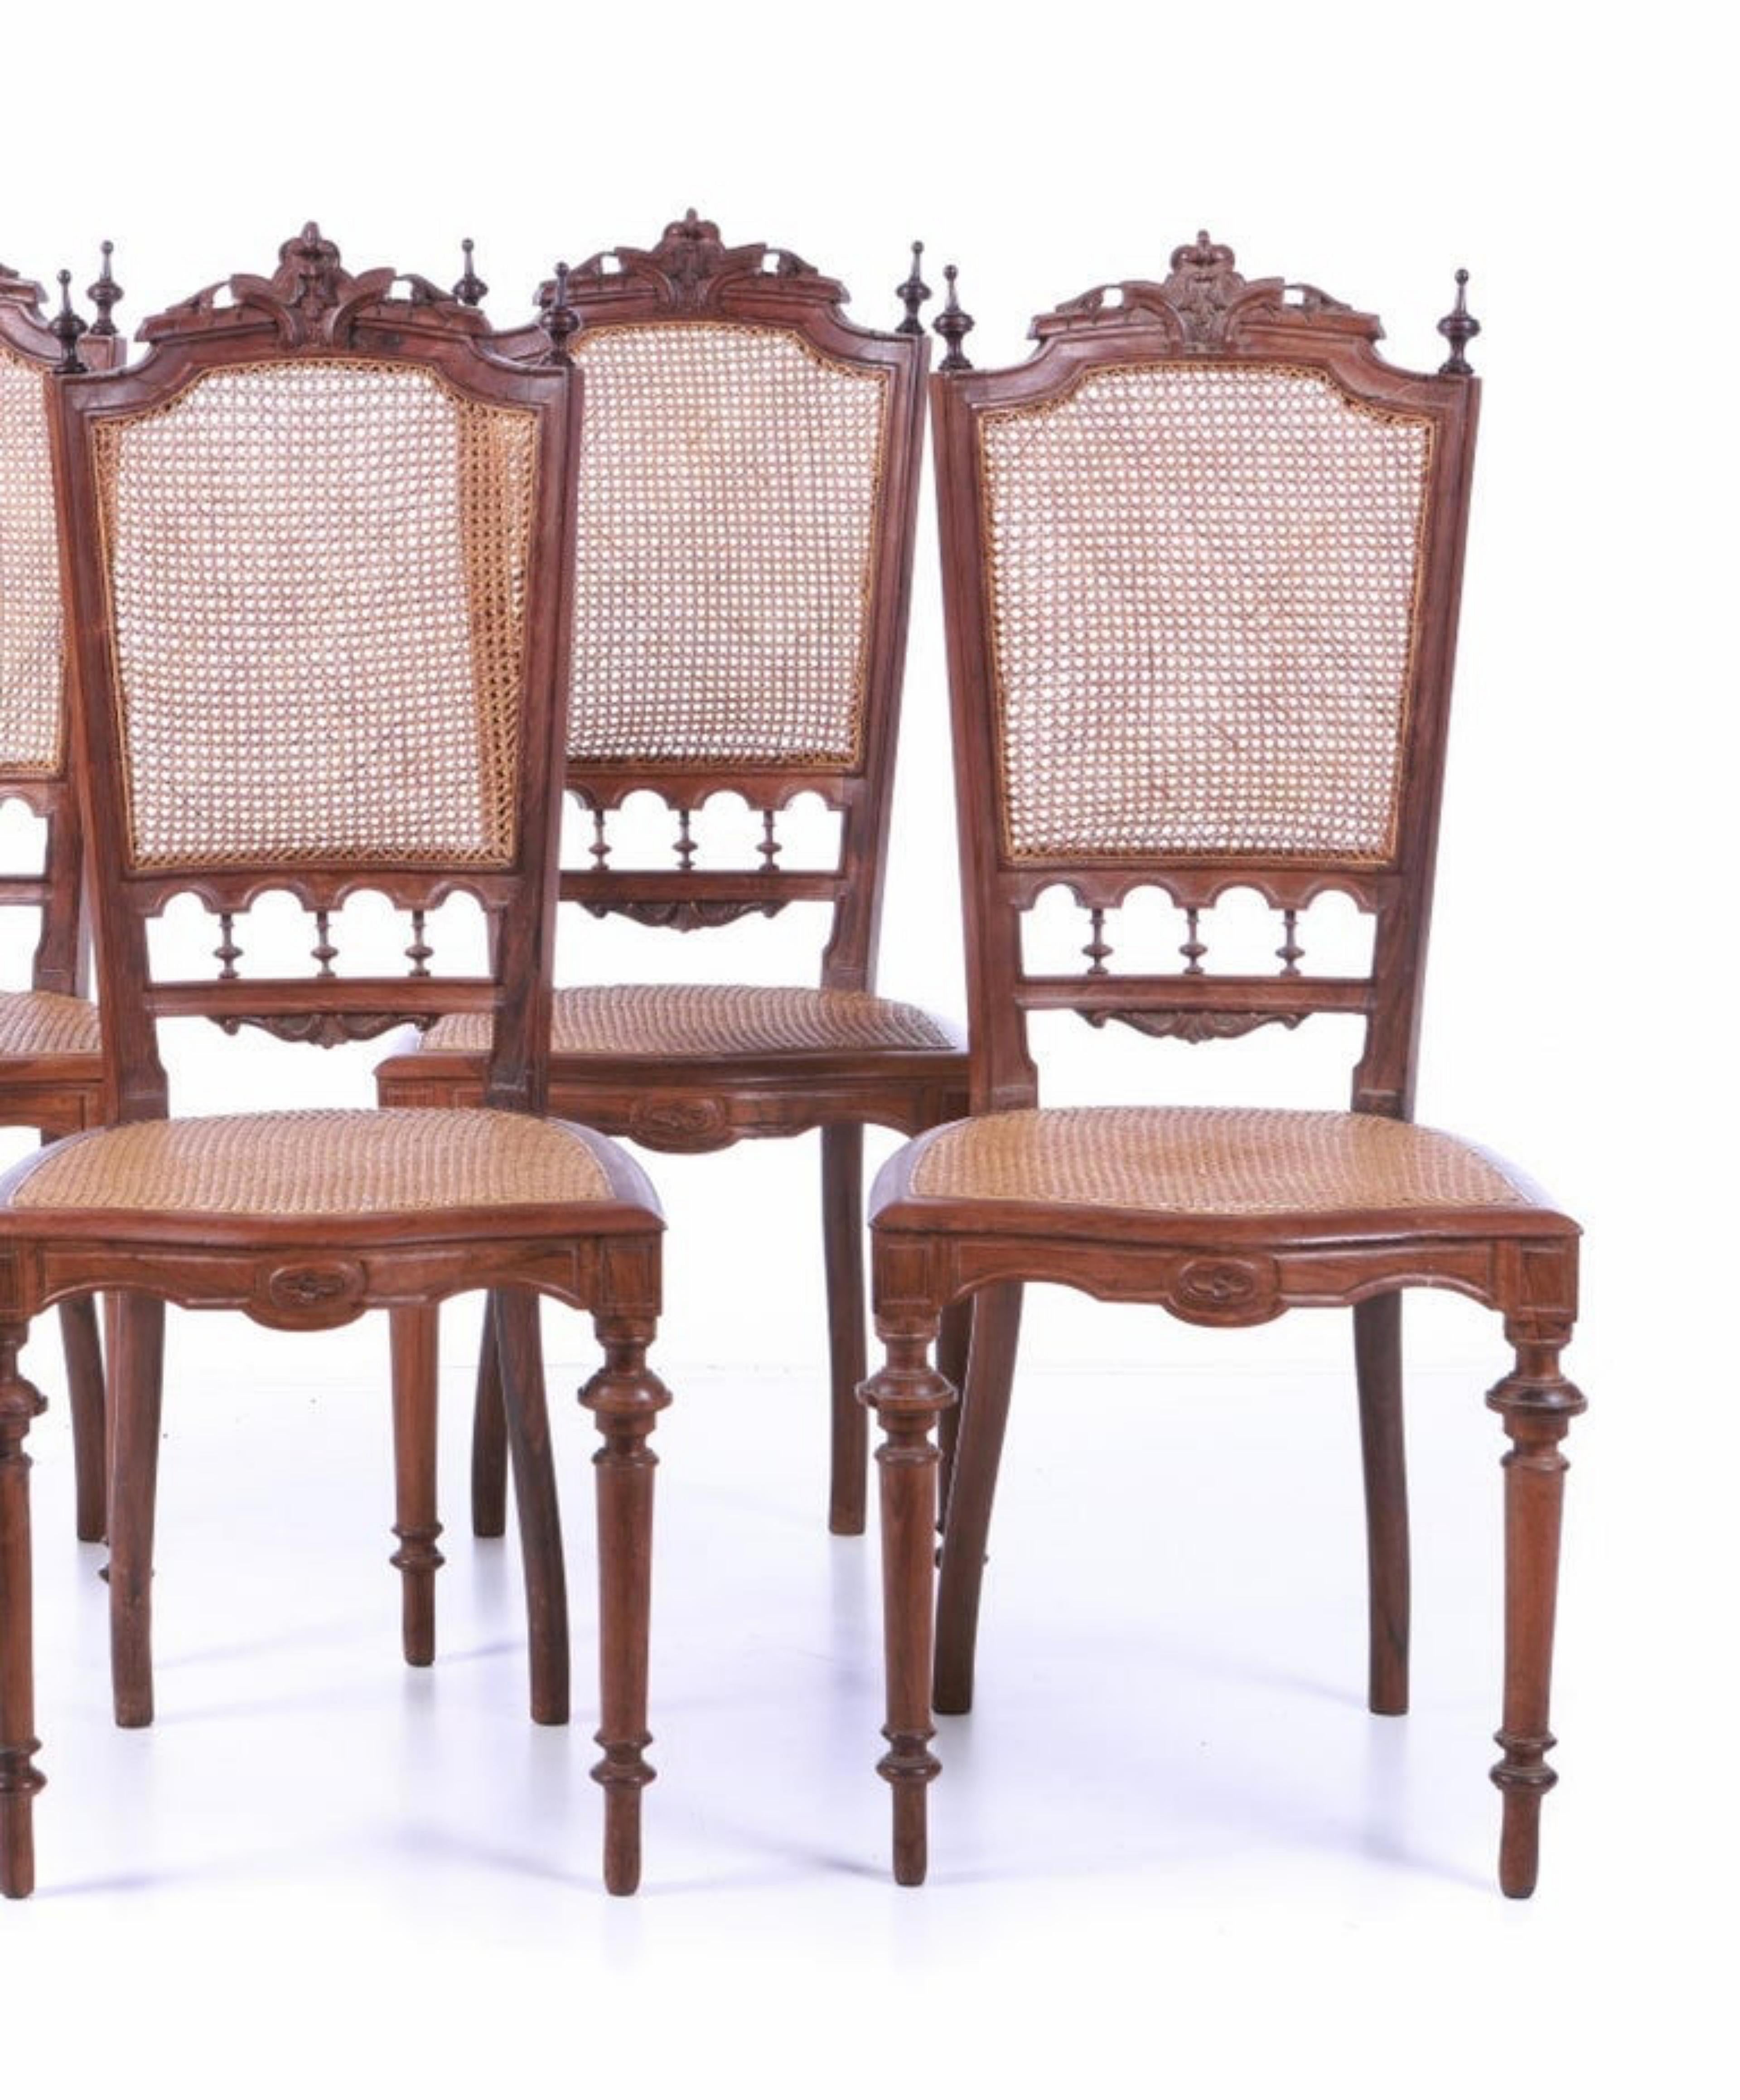 4 Chairs
Portuguese, 19th century
in Brazilian rosewood, carved. Seat and back in straw. Signs of use.
 Dimensions: 100 x 43 x 41 cm.